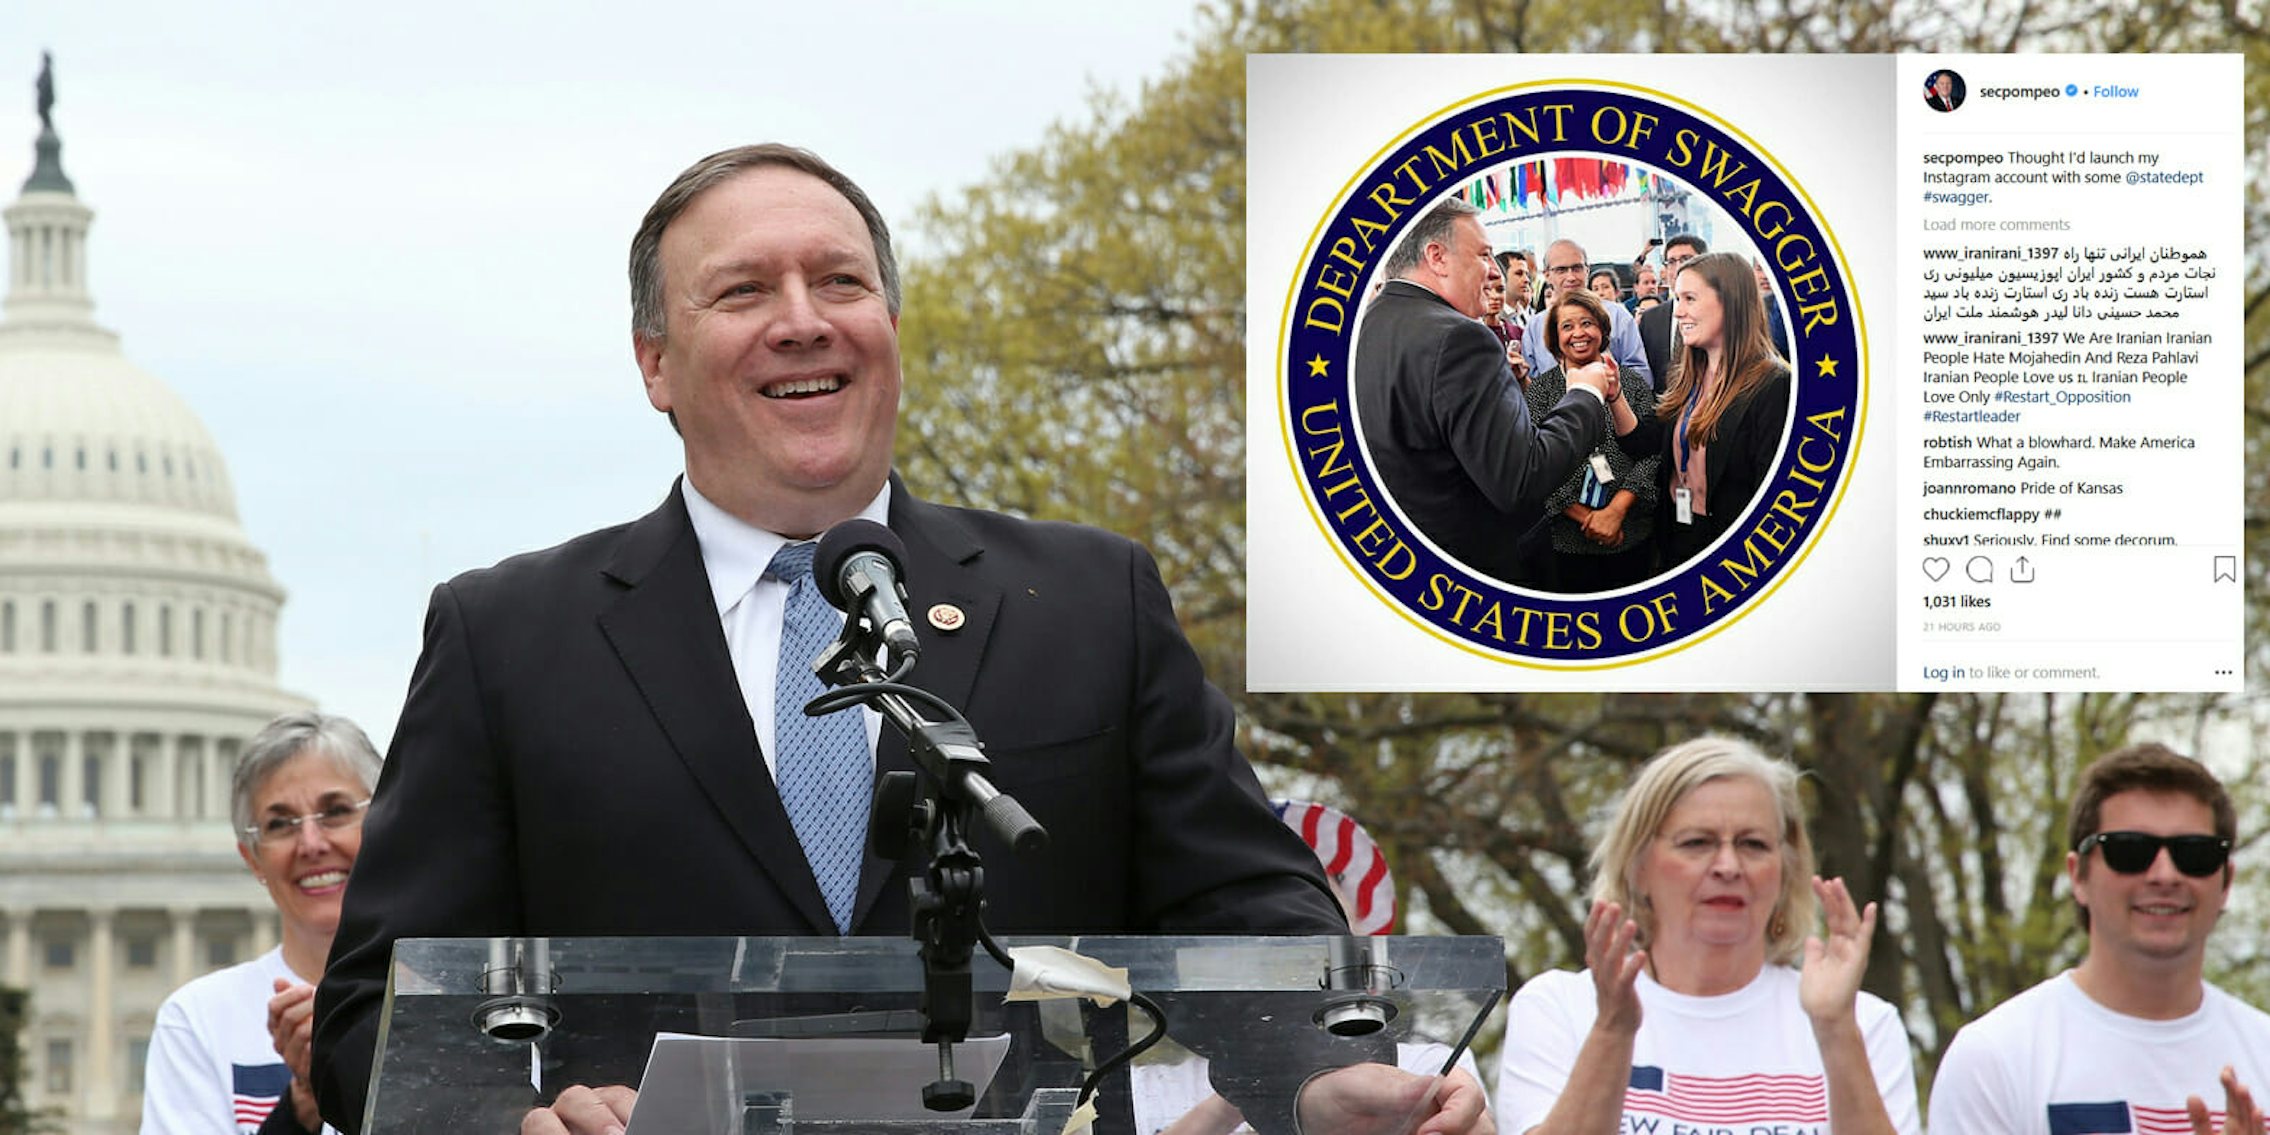 Secretary of State Mike Pompeo was roasted online after he posted a 'Department of Swagger' seal on Instagram and Twitter.